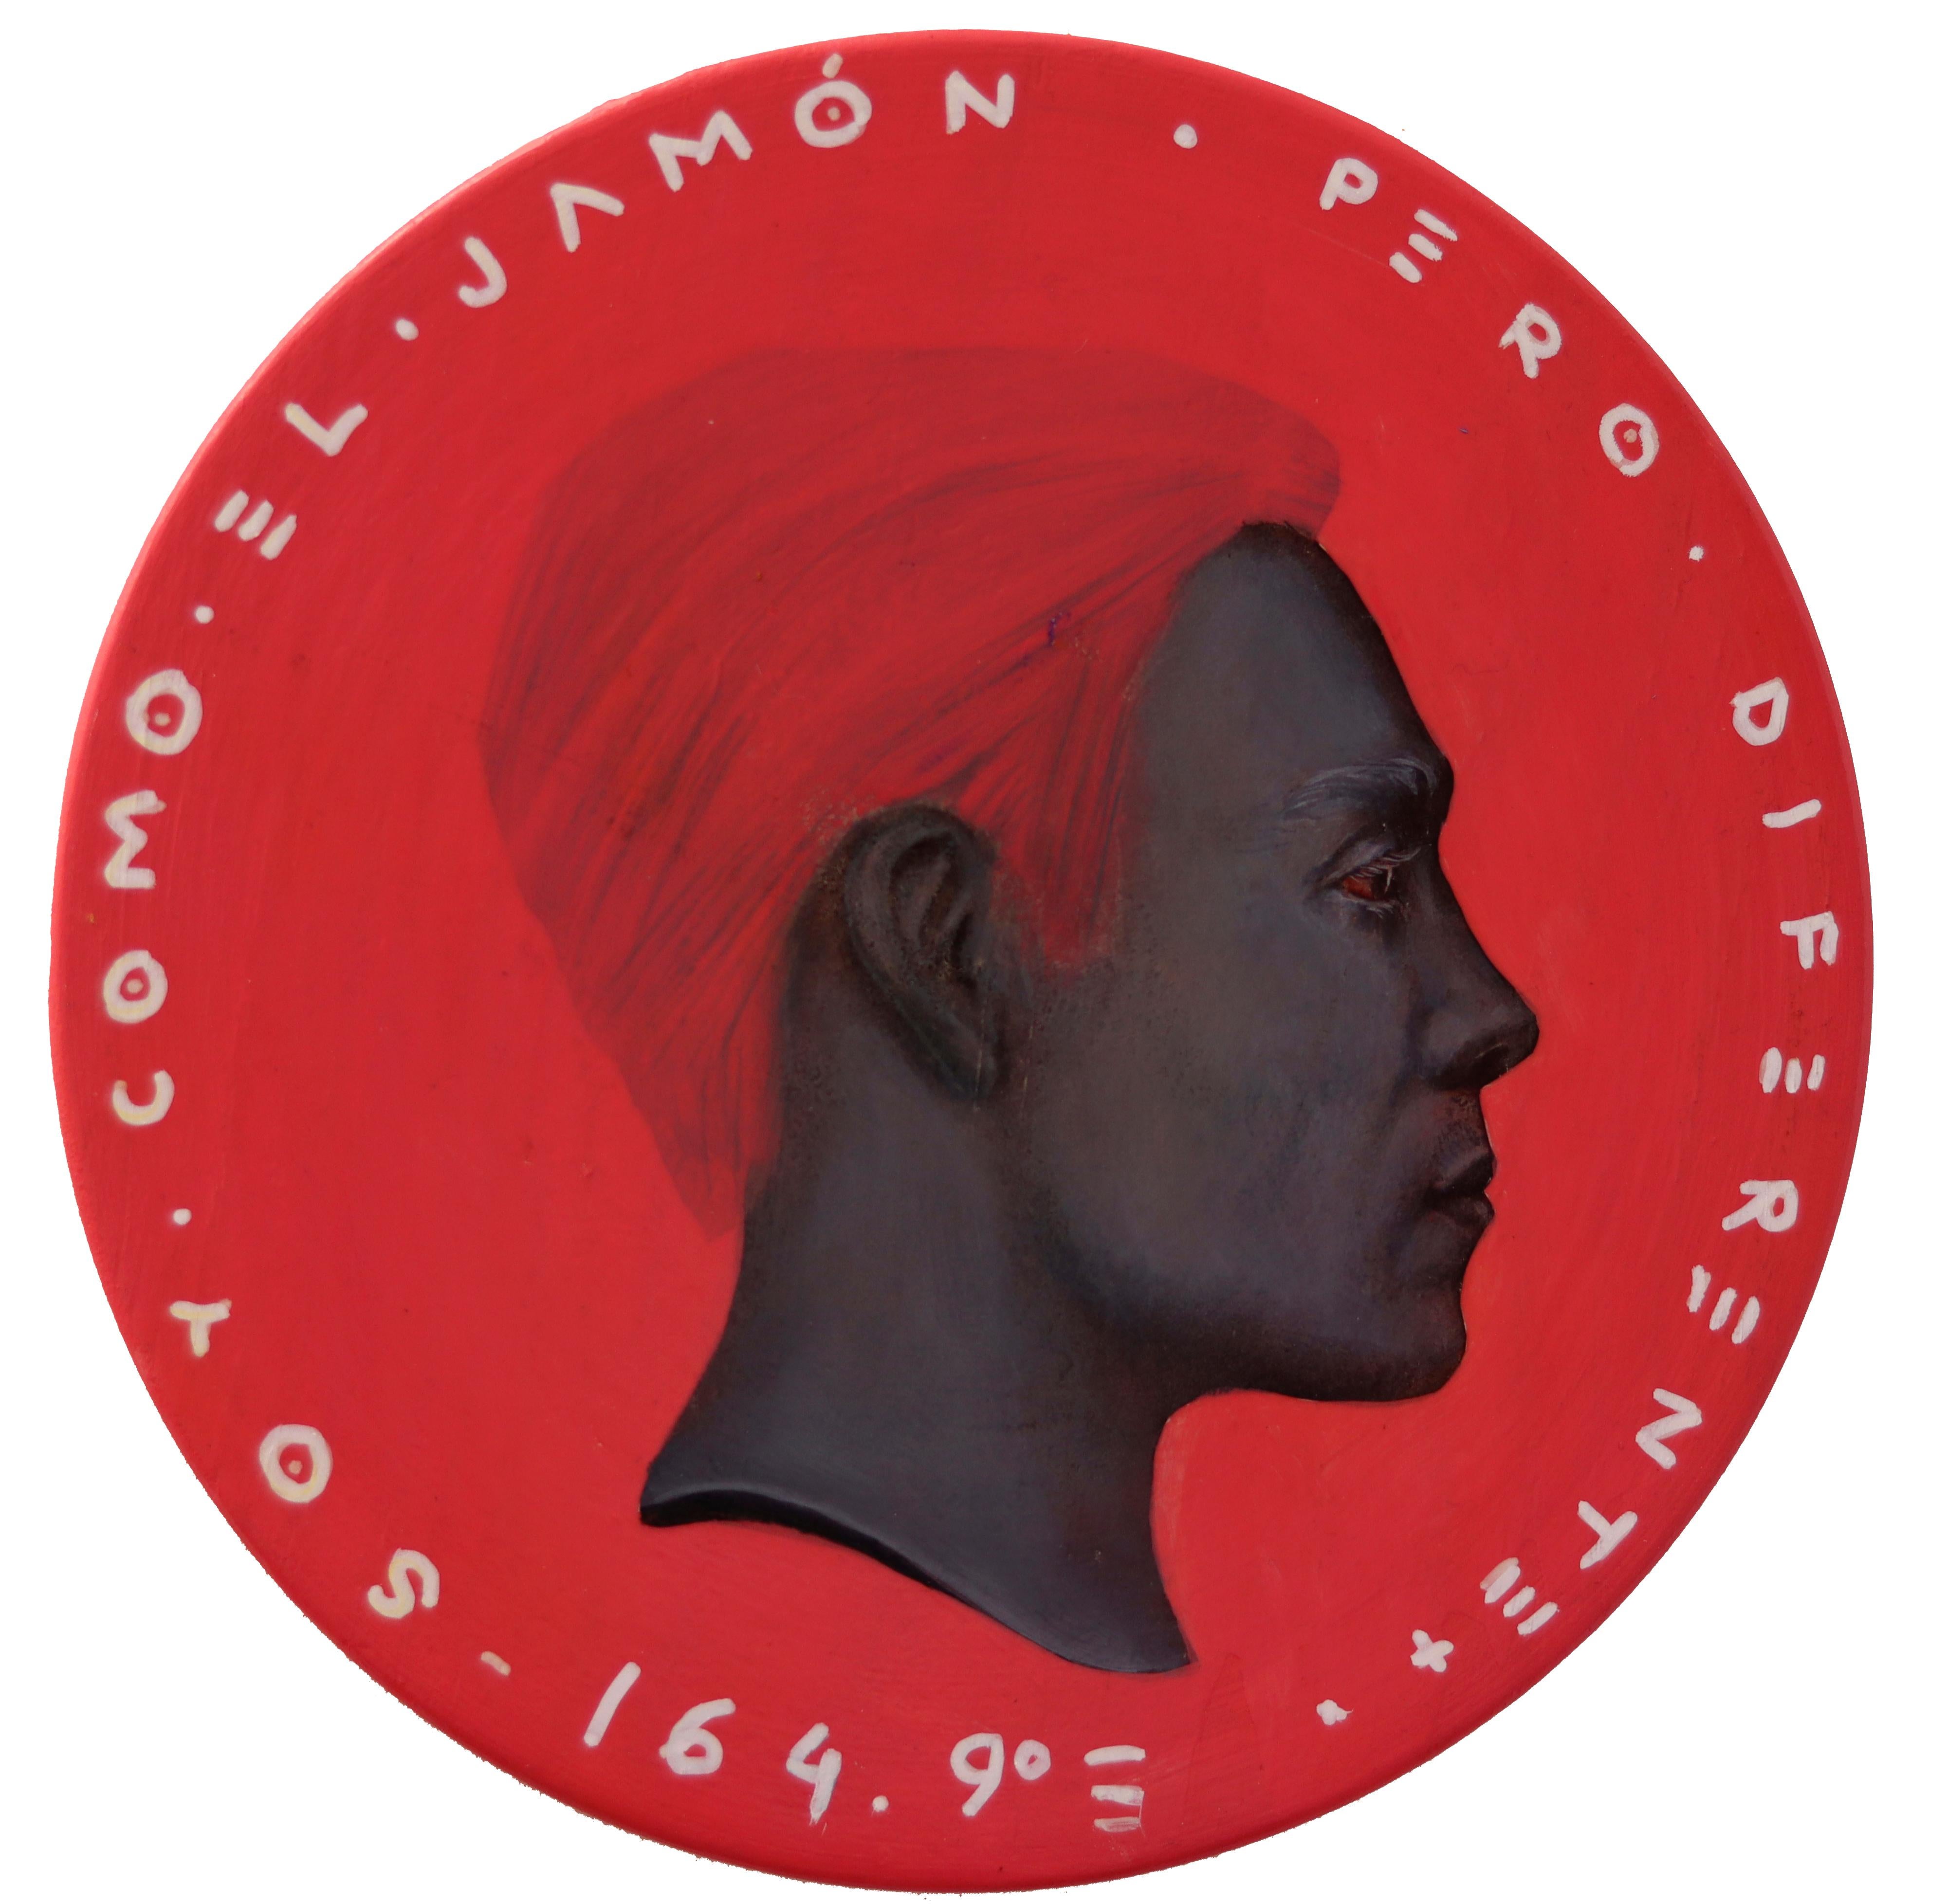 Natasha Lelenco Portrait Painting - Pale Red and Grey Contrast Side Profile Male Portrait on Wood "Currency #162"